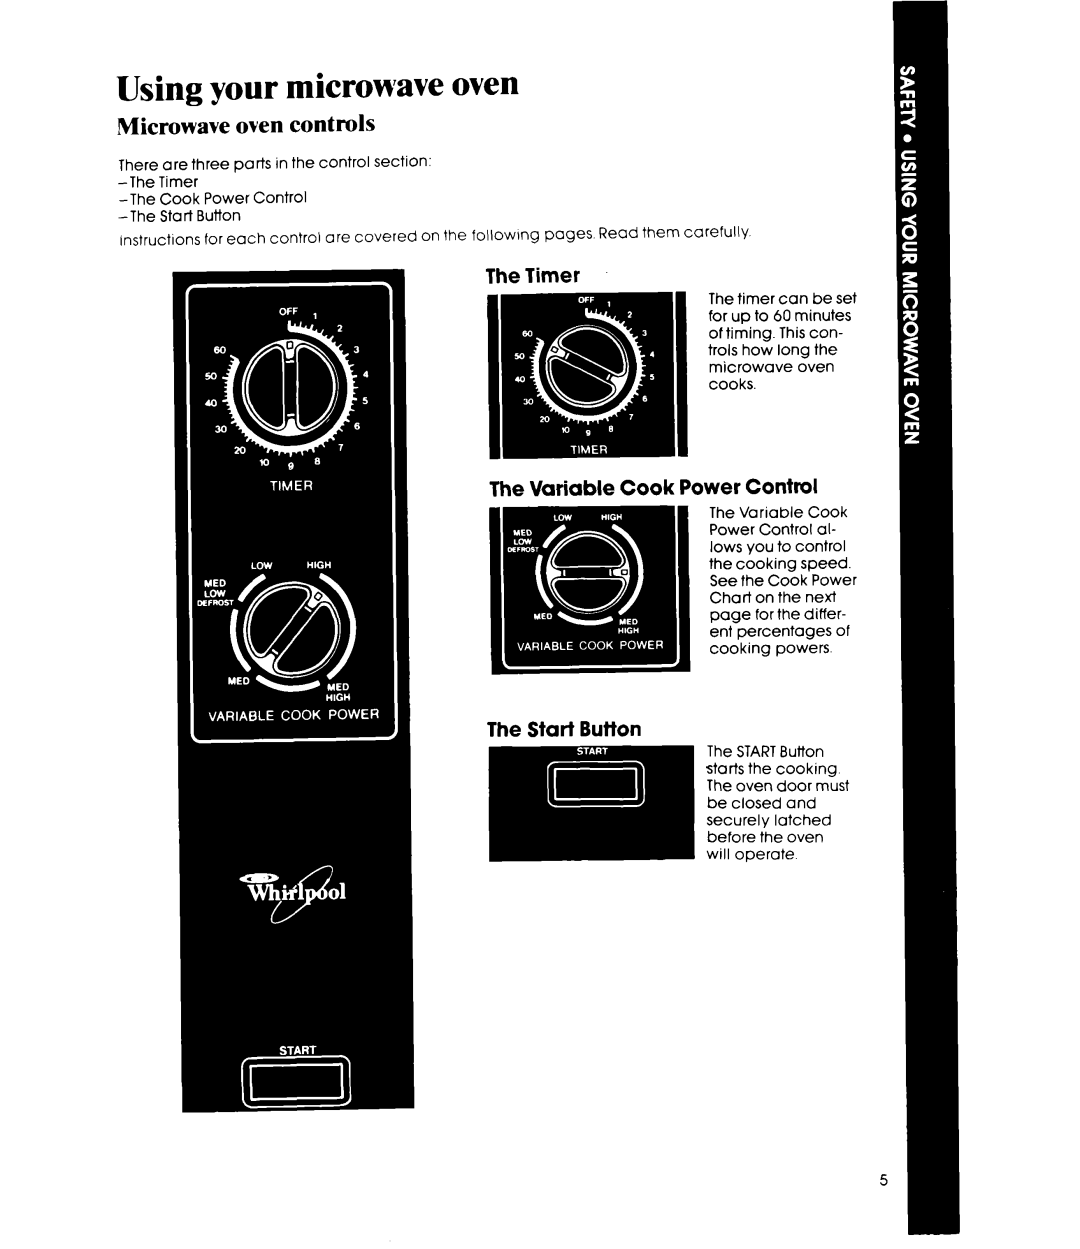 Whirlpool MW8200XR manual Using your microwave oven, Microwave oven controls, The Start Button 